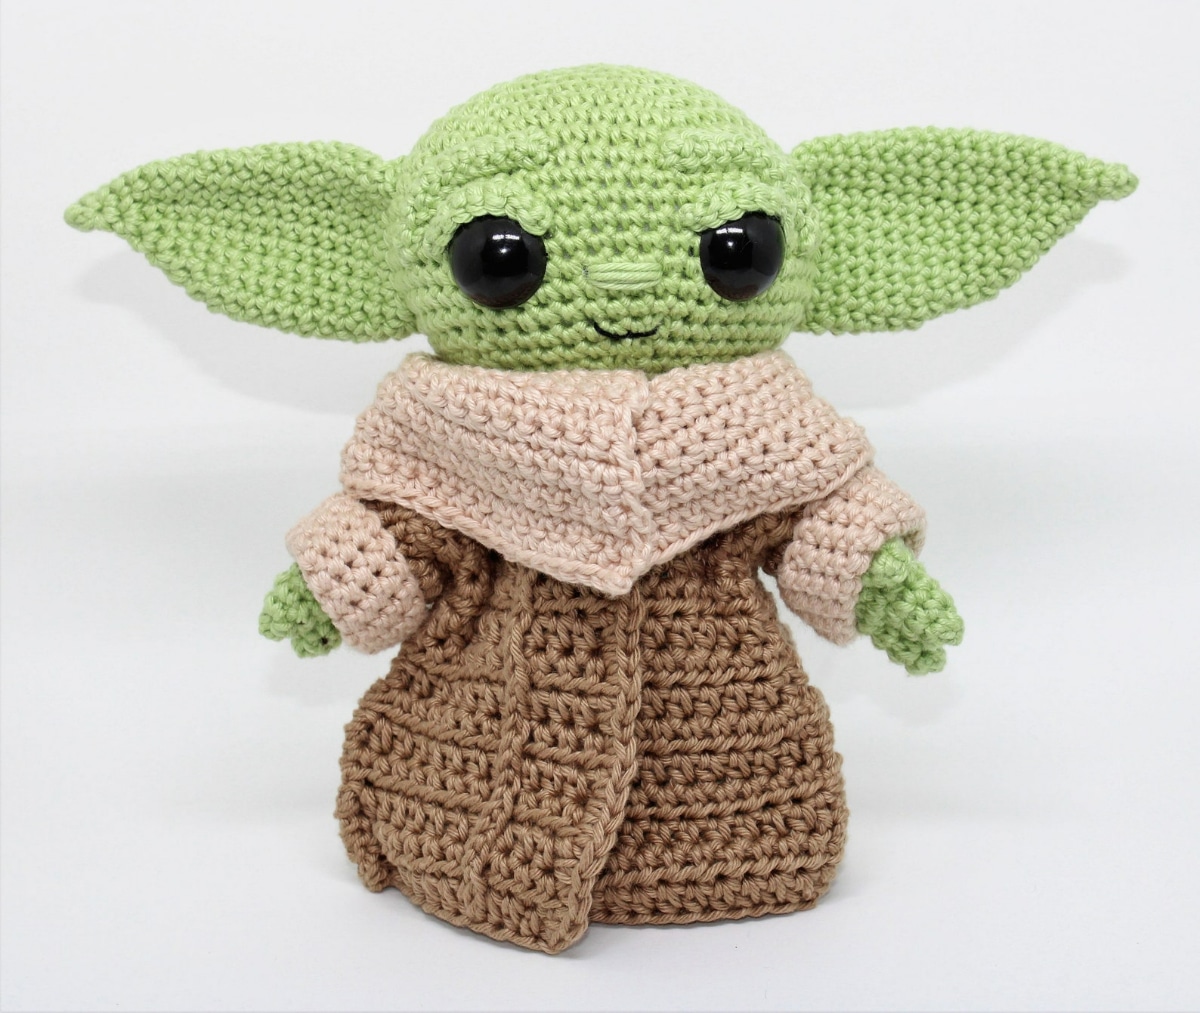 Small green crochet baby Yoda wearing a brown robe with a pale pink collar and cuffs standing on a white background.